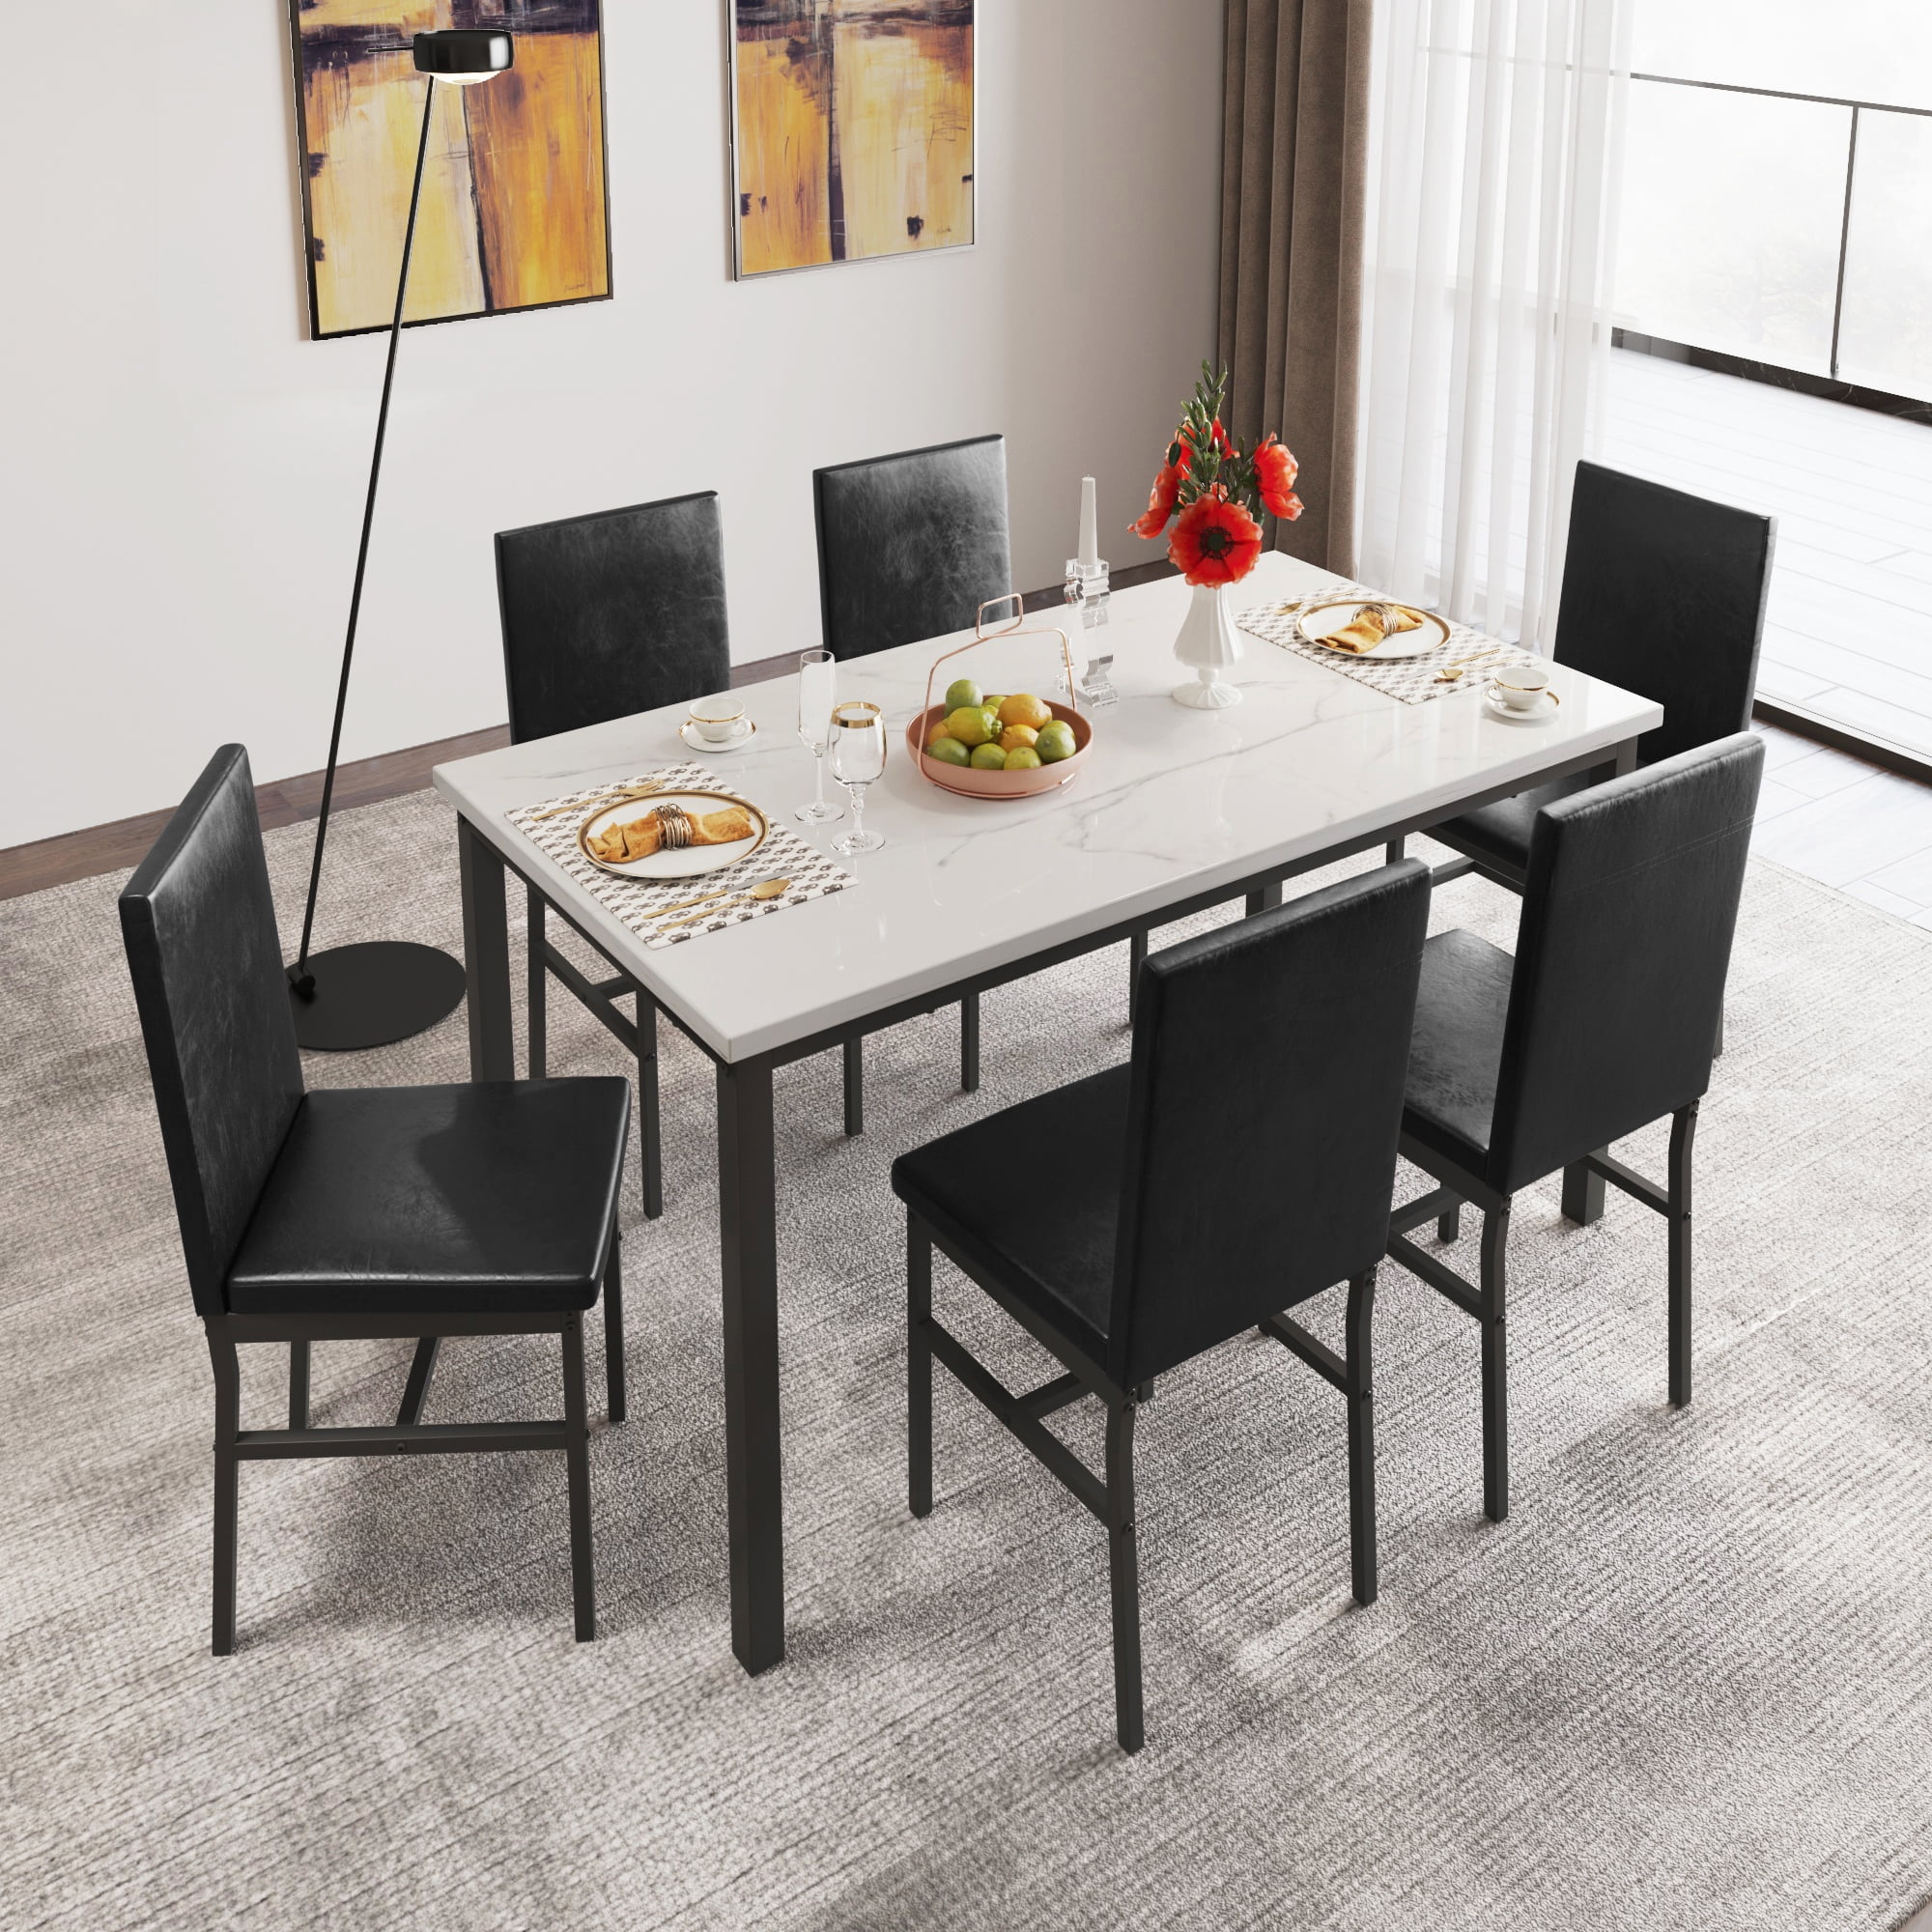 SEGMART Dining Table with 6 High-back Upholstered Chairs, Modern ...